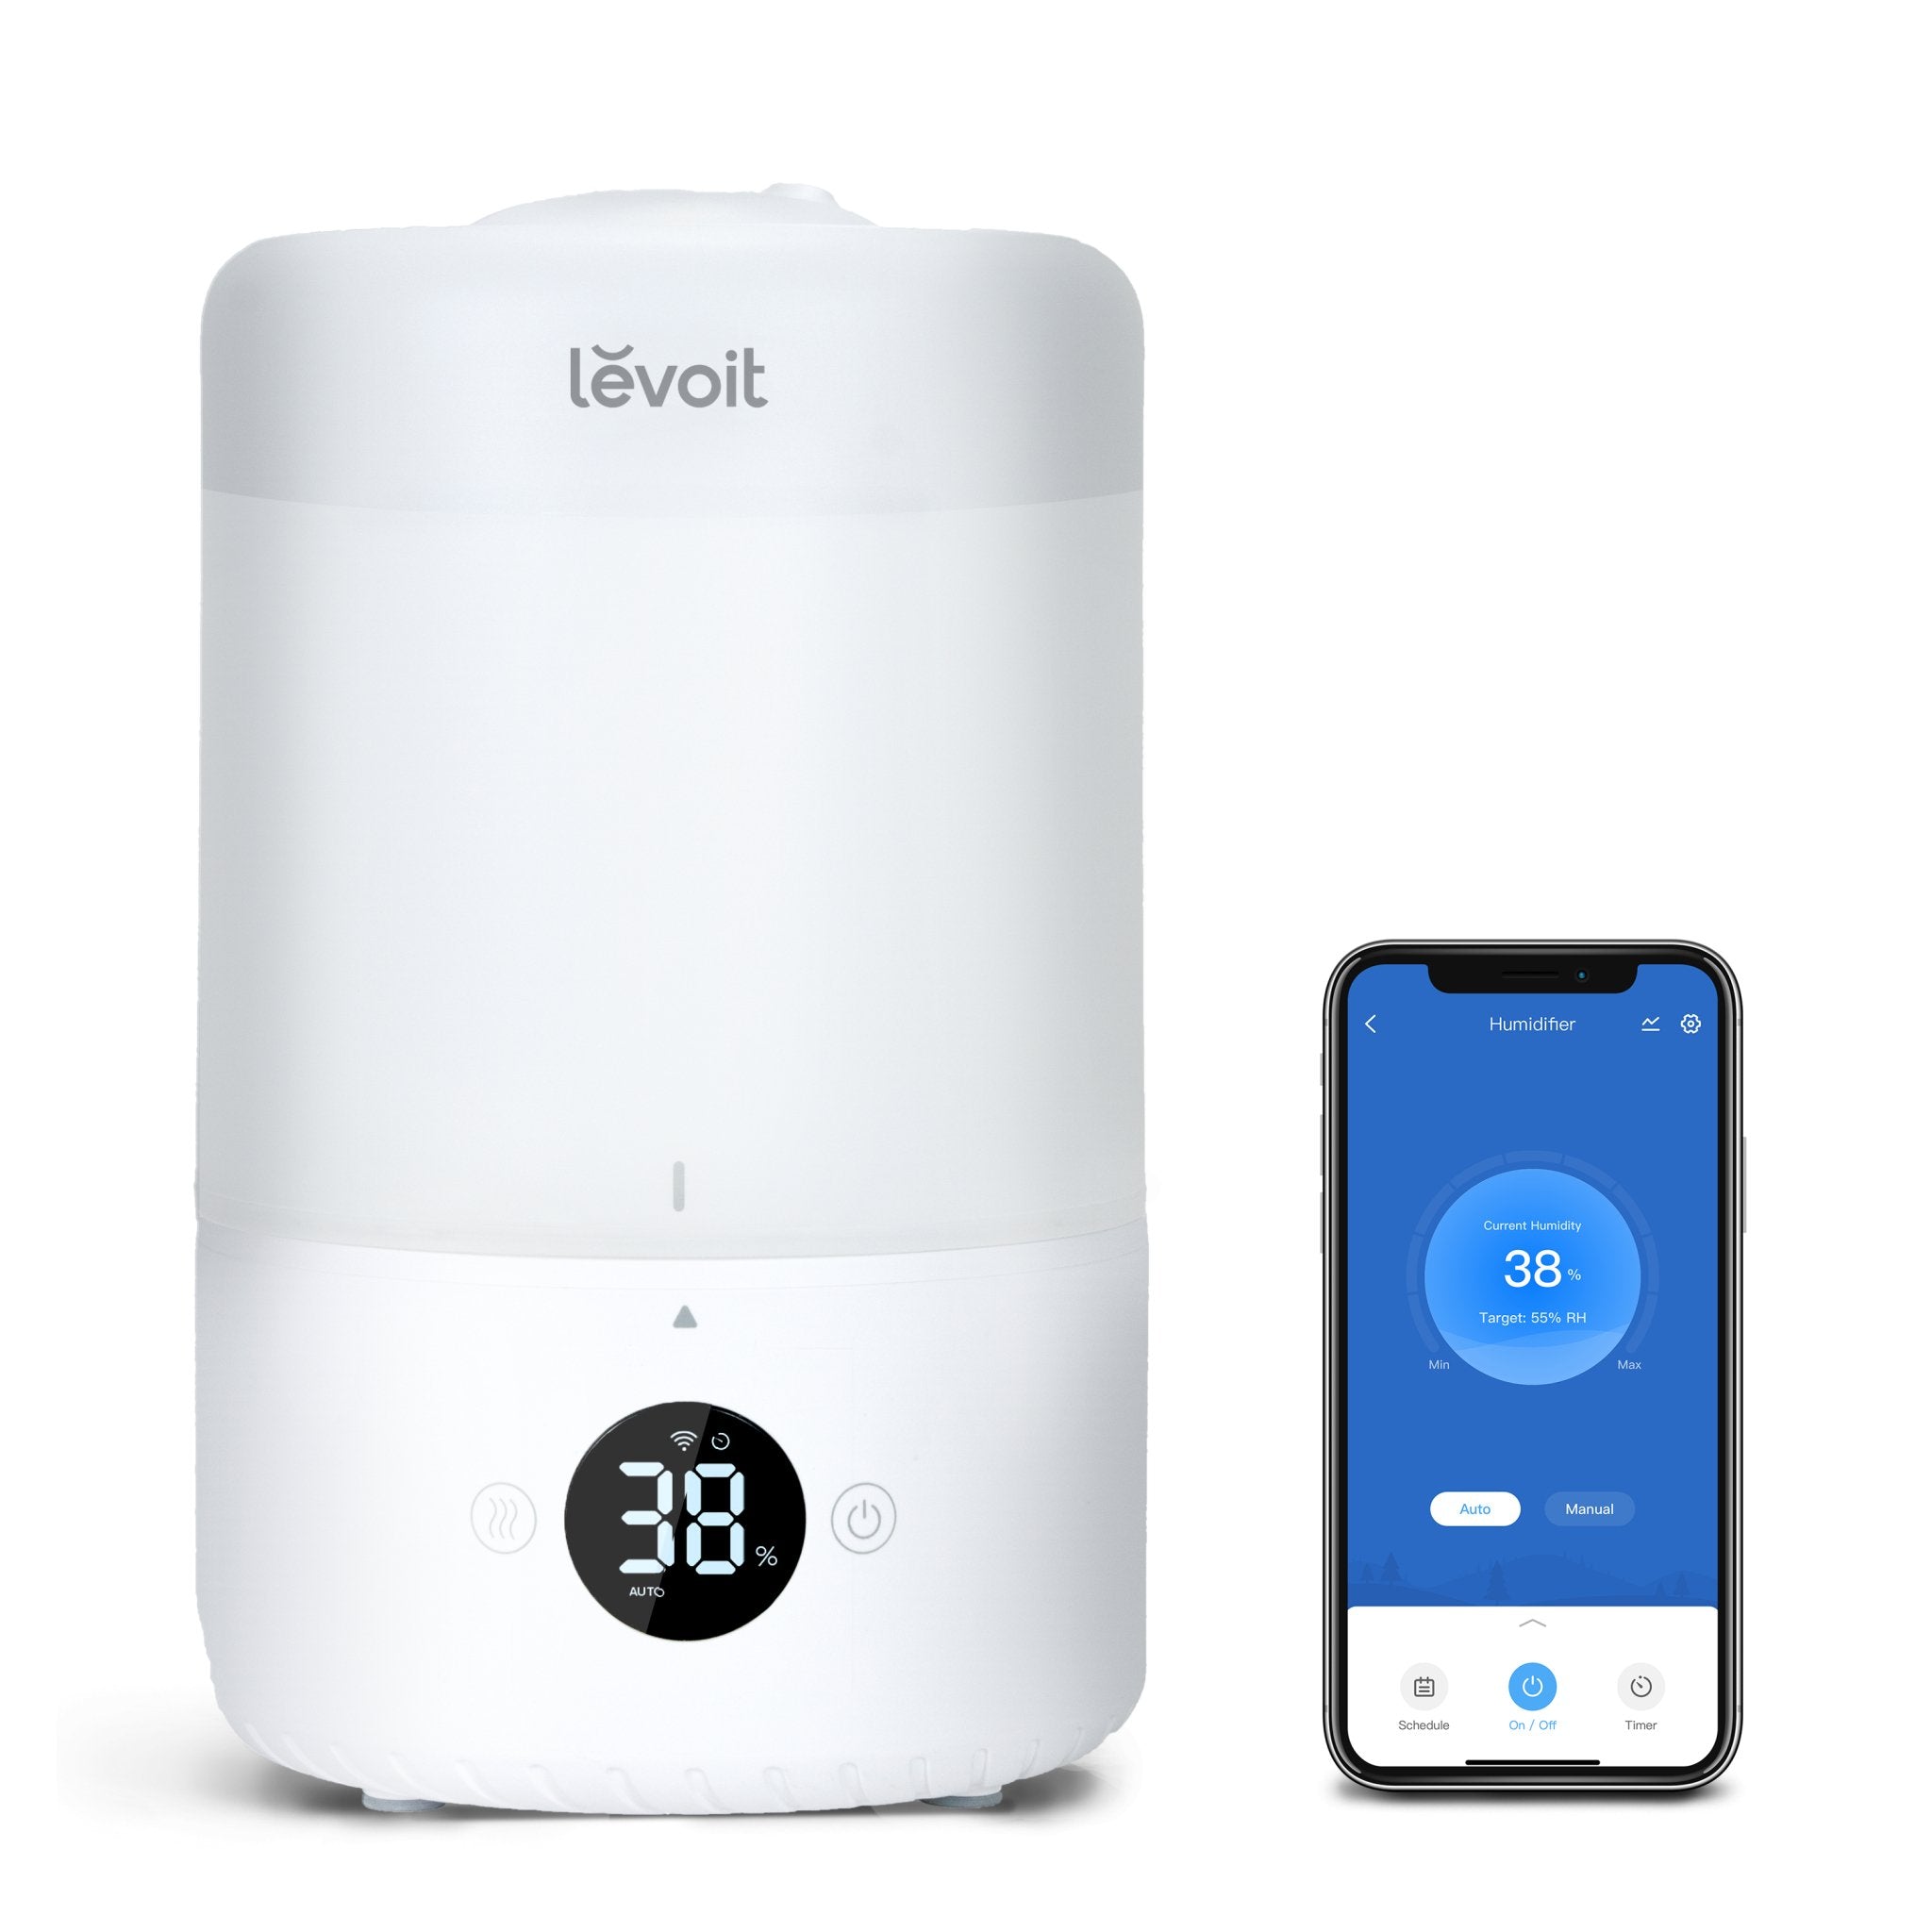 Levoit 200S Dual Smart Top Fill Humidifier